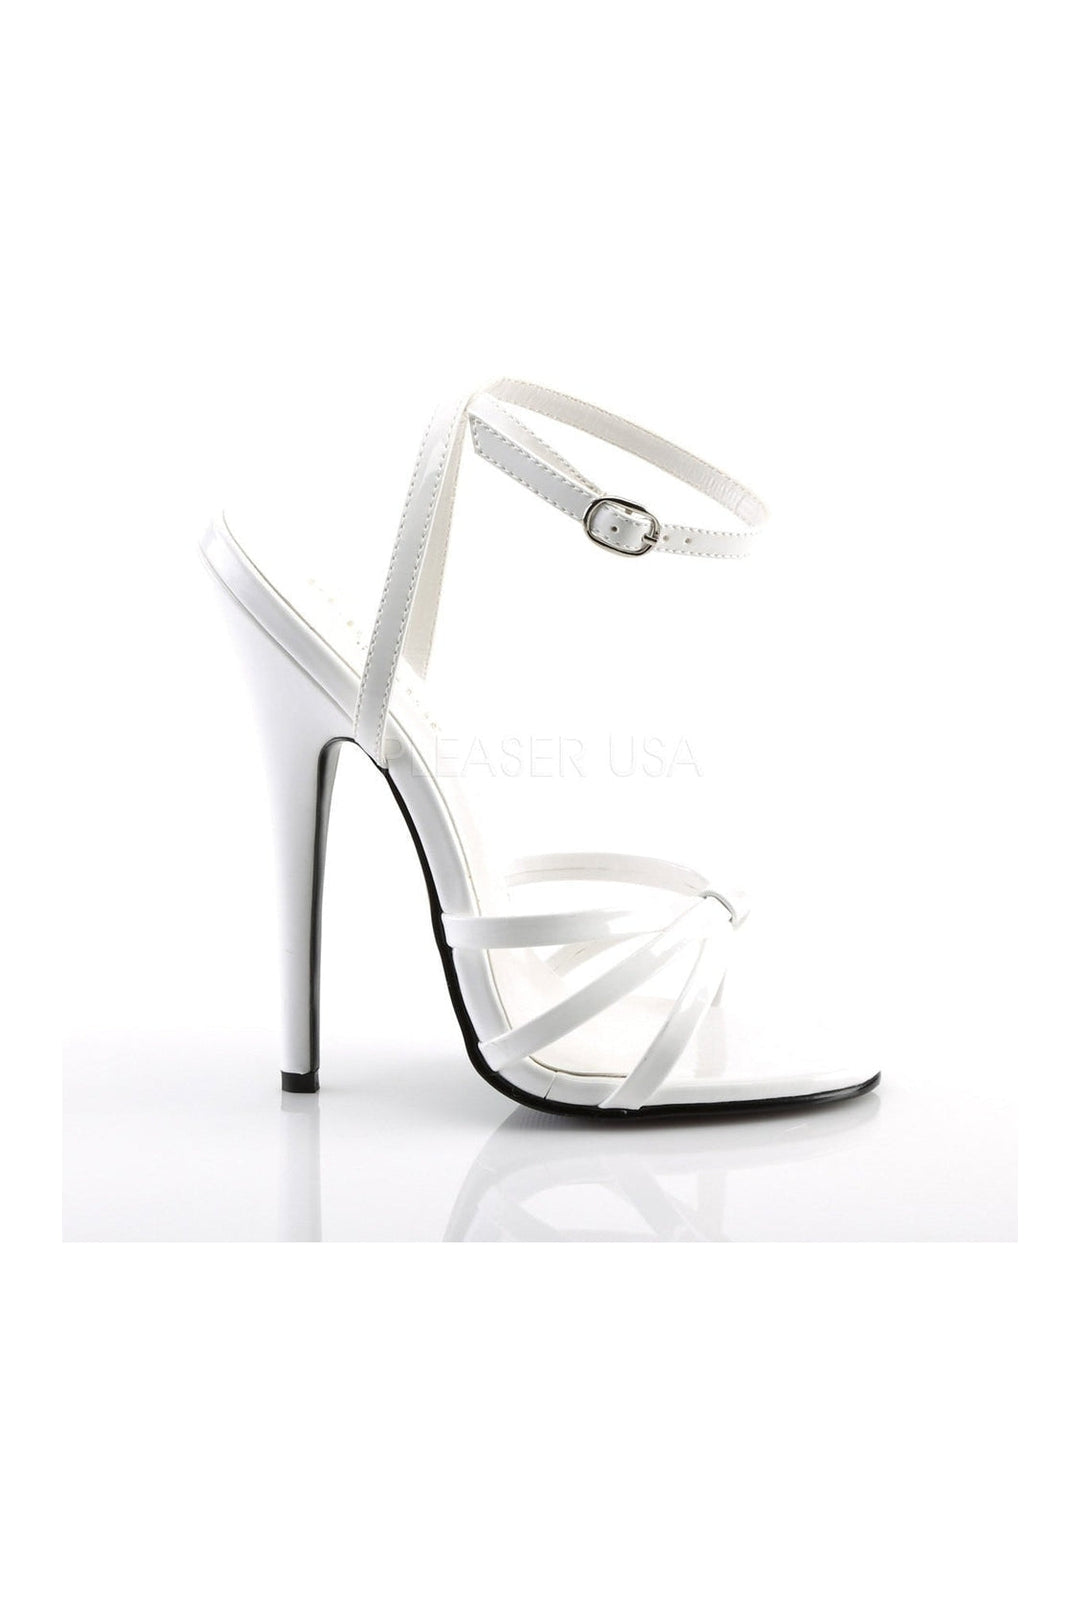 DOMINA-108 Sandal | White Patent-Sandals- Stripper Shoes at SEXYSHOES.COM